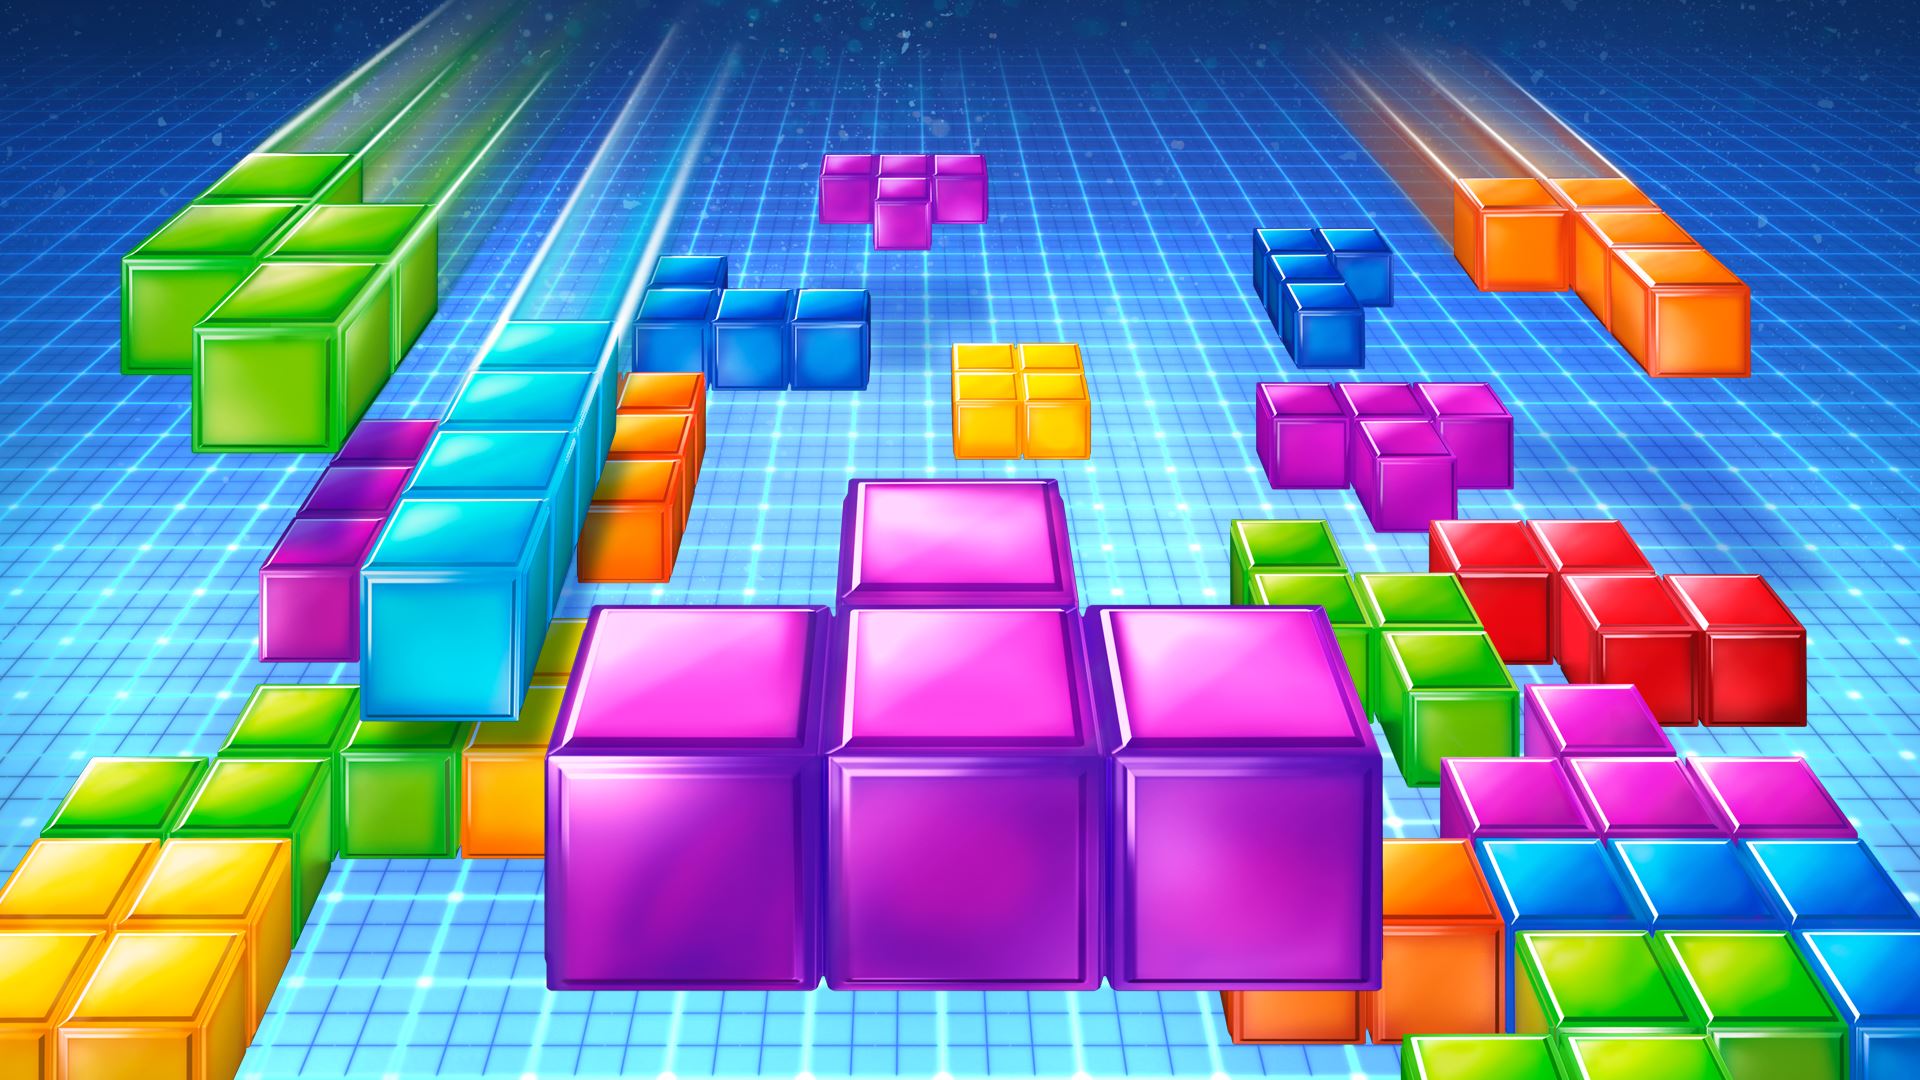  Tetris High Resolution Backgrounds GsFDcY